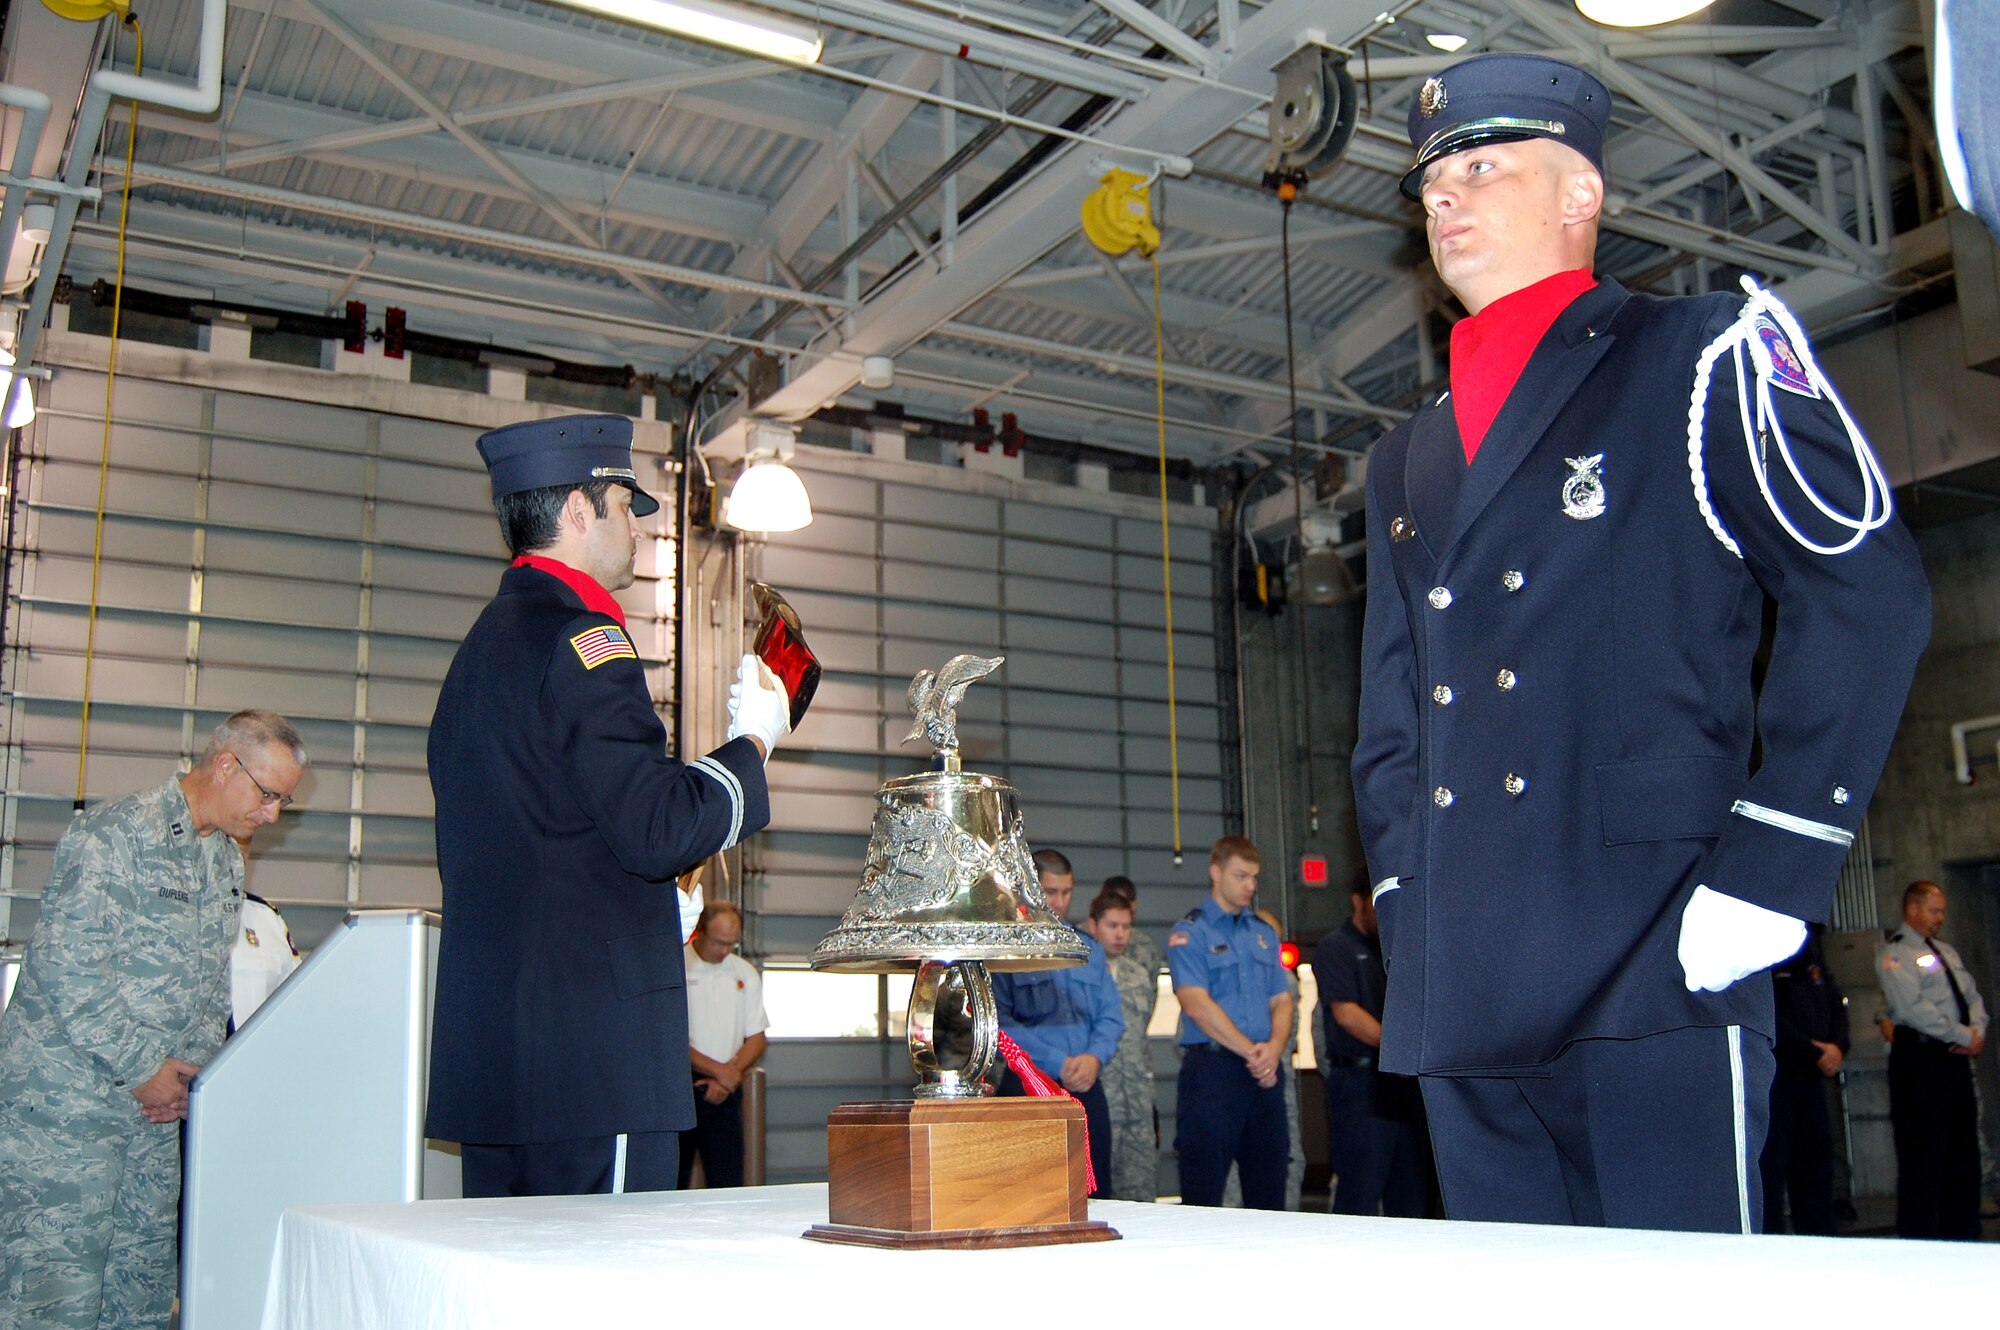 OFFUTT AIR FORCE BASE, Neb. - (From left) Chaplain (Capt.) Robert Duplease gives the innvocation during the Offutt Fire Department's 9/11 Remembrance Ceremony Sept. 10 in the bay of the fire station while ceremonial guard members Fire Captain Jason Bloom and Firefighter Brent Bergstrom stand at attention.  The annual ceremony, held during morning roll call, included the final alarm given to honor firefighters who have lost their lives in the line of duty. According to Station Chief Roger Filter, the tradition of the final alarm, consiting of two sets of five bell rings, dates back to the days of horse and buggy firefighters when alarm boxes were located around cities so people could notify fire departments of fires. They were also used  to notify citizens of the death of a firefighter.  U.S. Air Force photo by Debbie Aragon